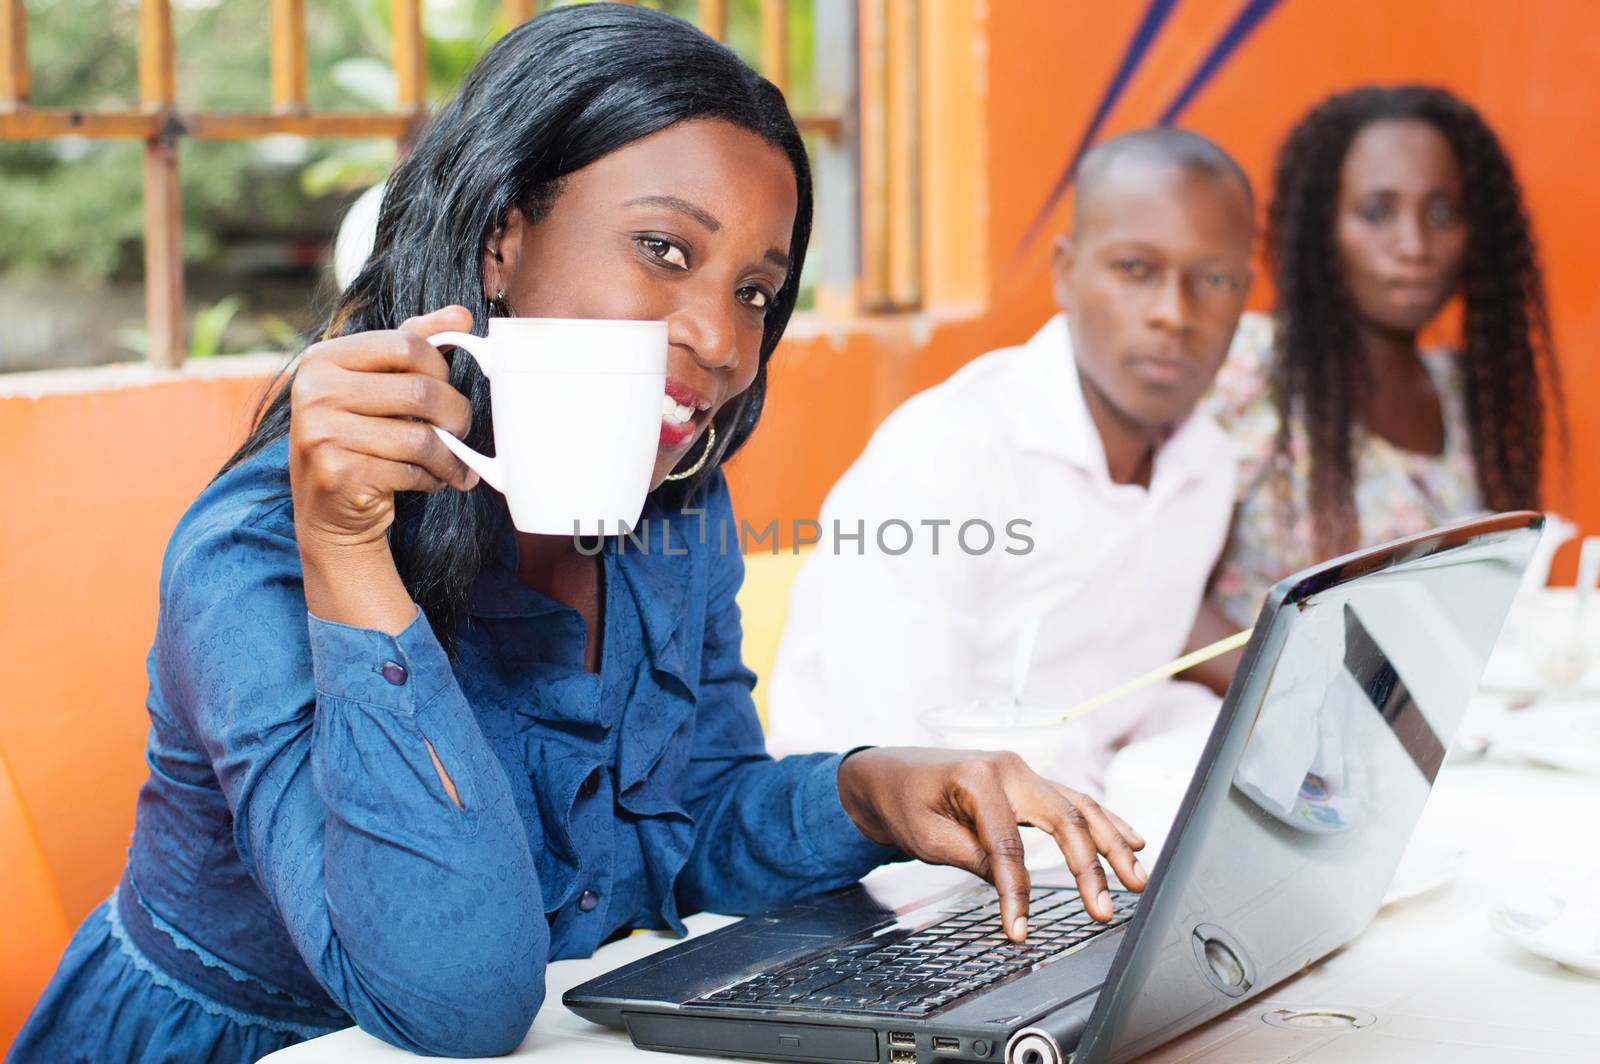 This beautiful smiling businesswoman, working on her laptop with a cup of coffee in hand.